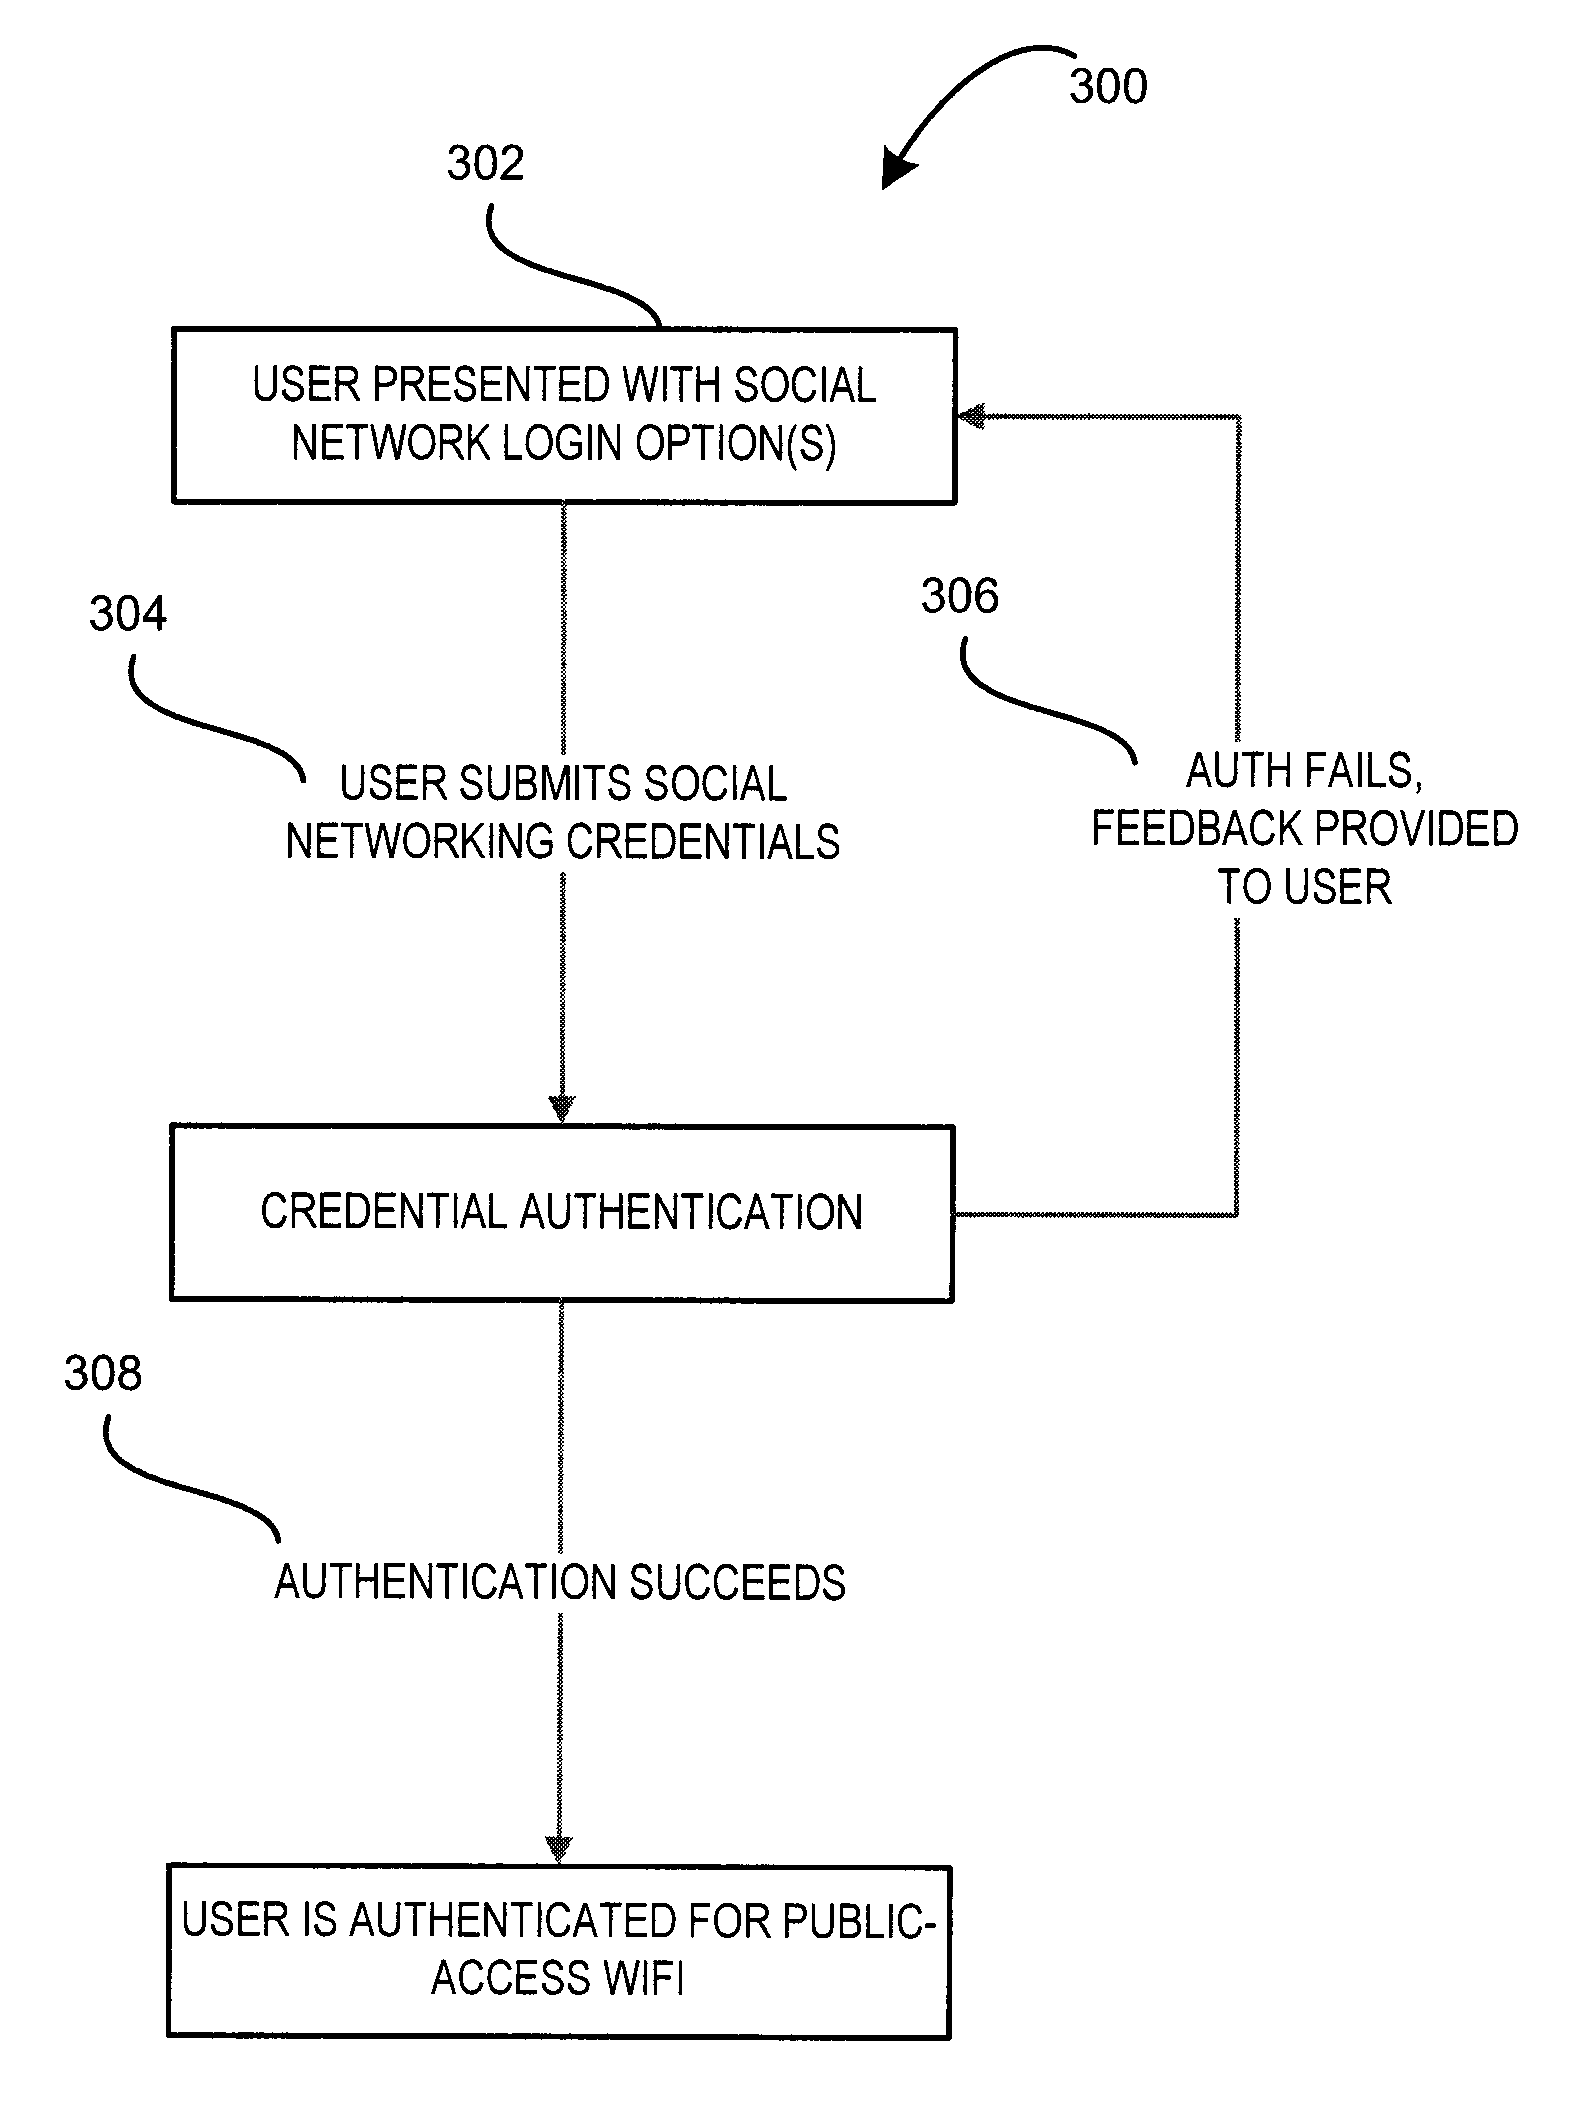 Hotspot network access system and method